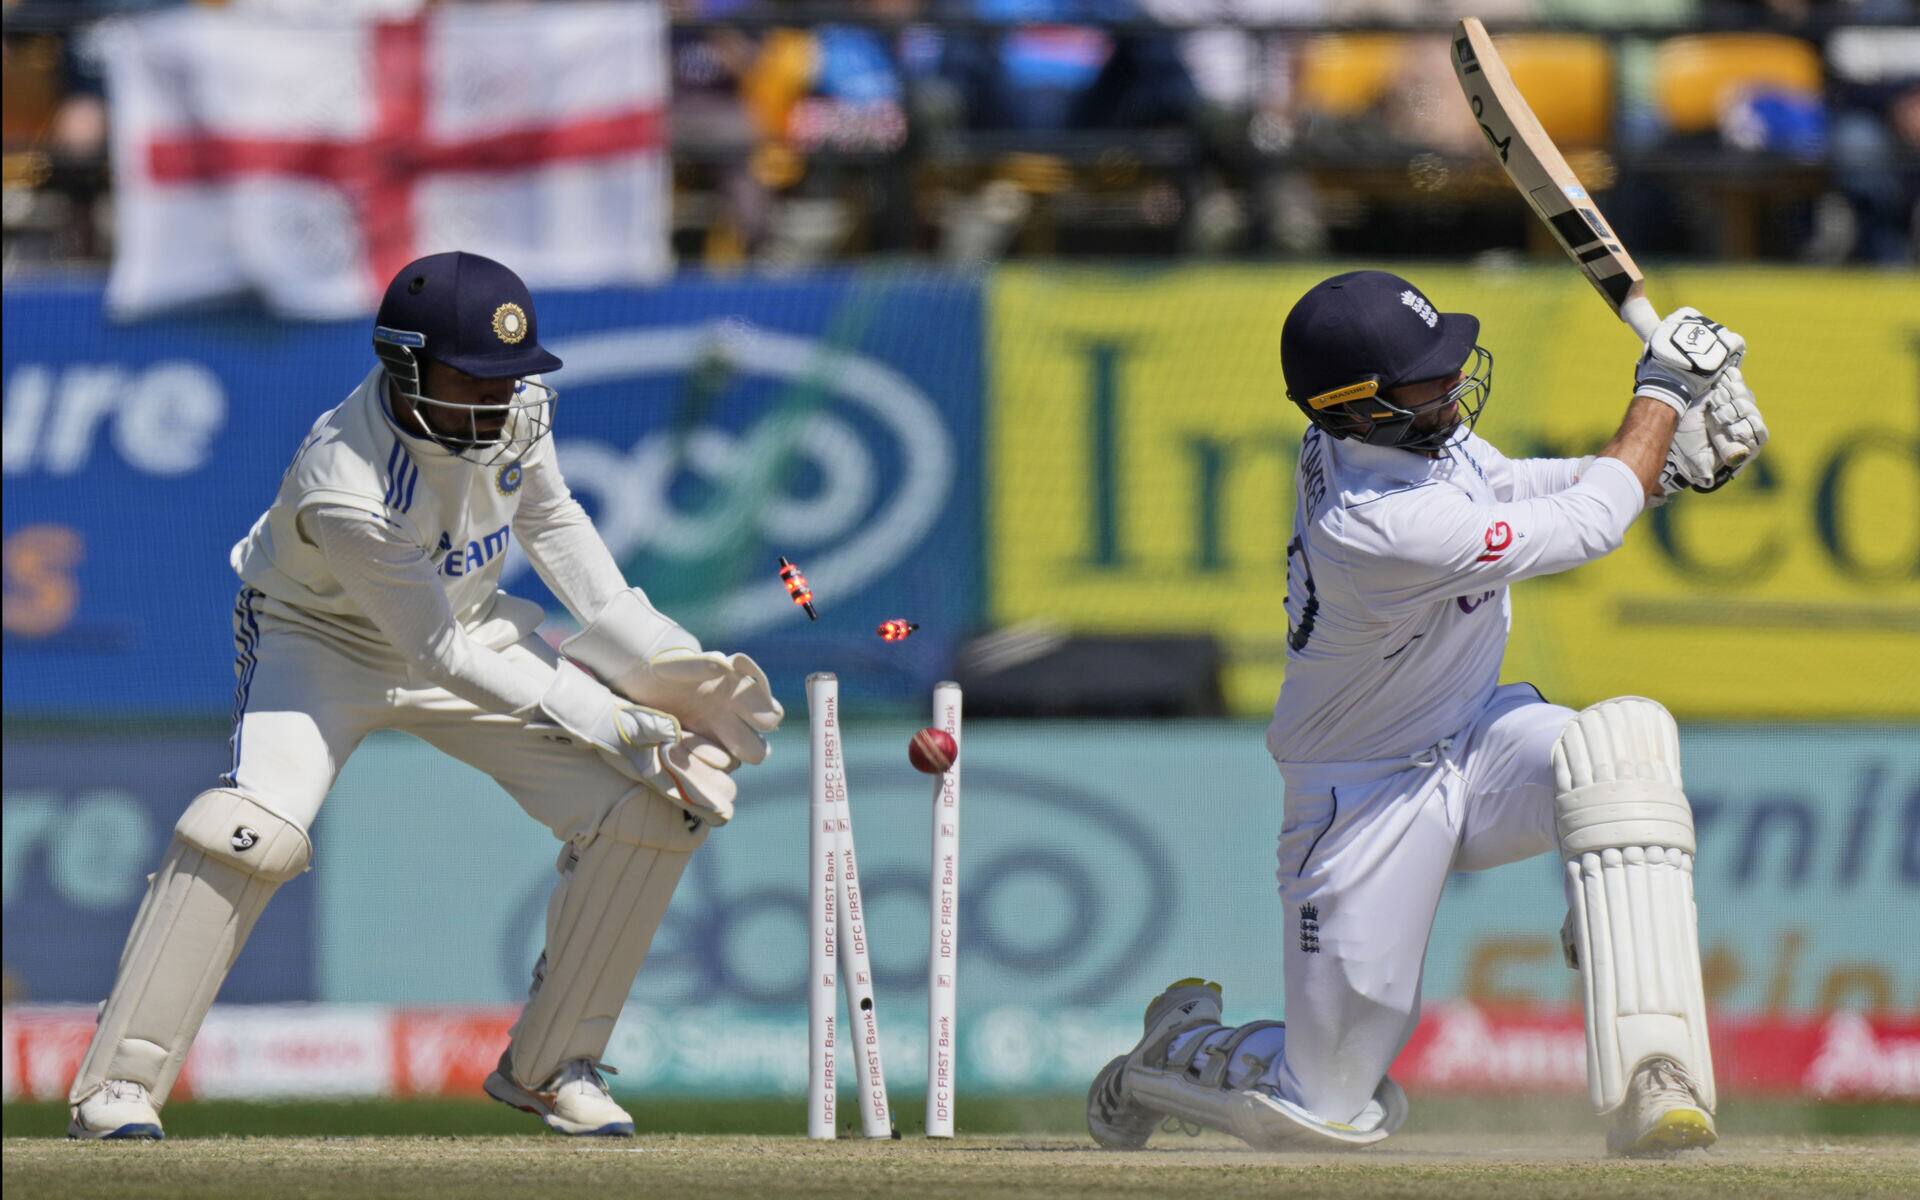 IND vs ENG, 5th Test, Day 3 Live Score: Match Updates, Highlights & Live Streaming